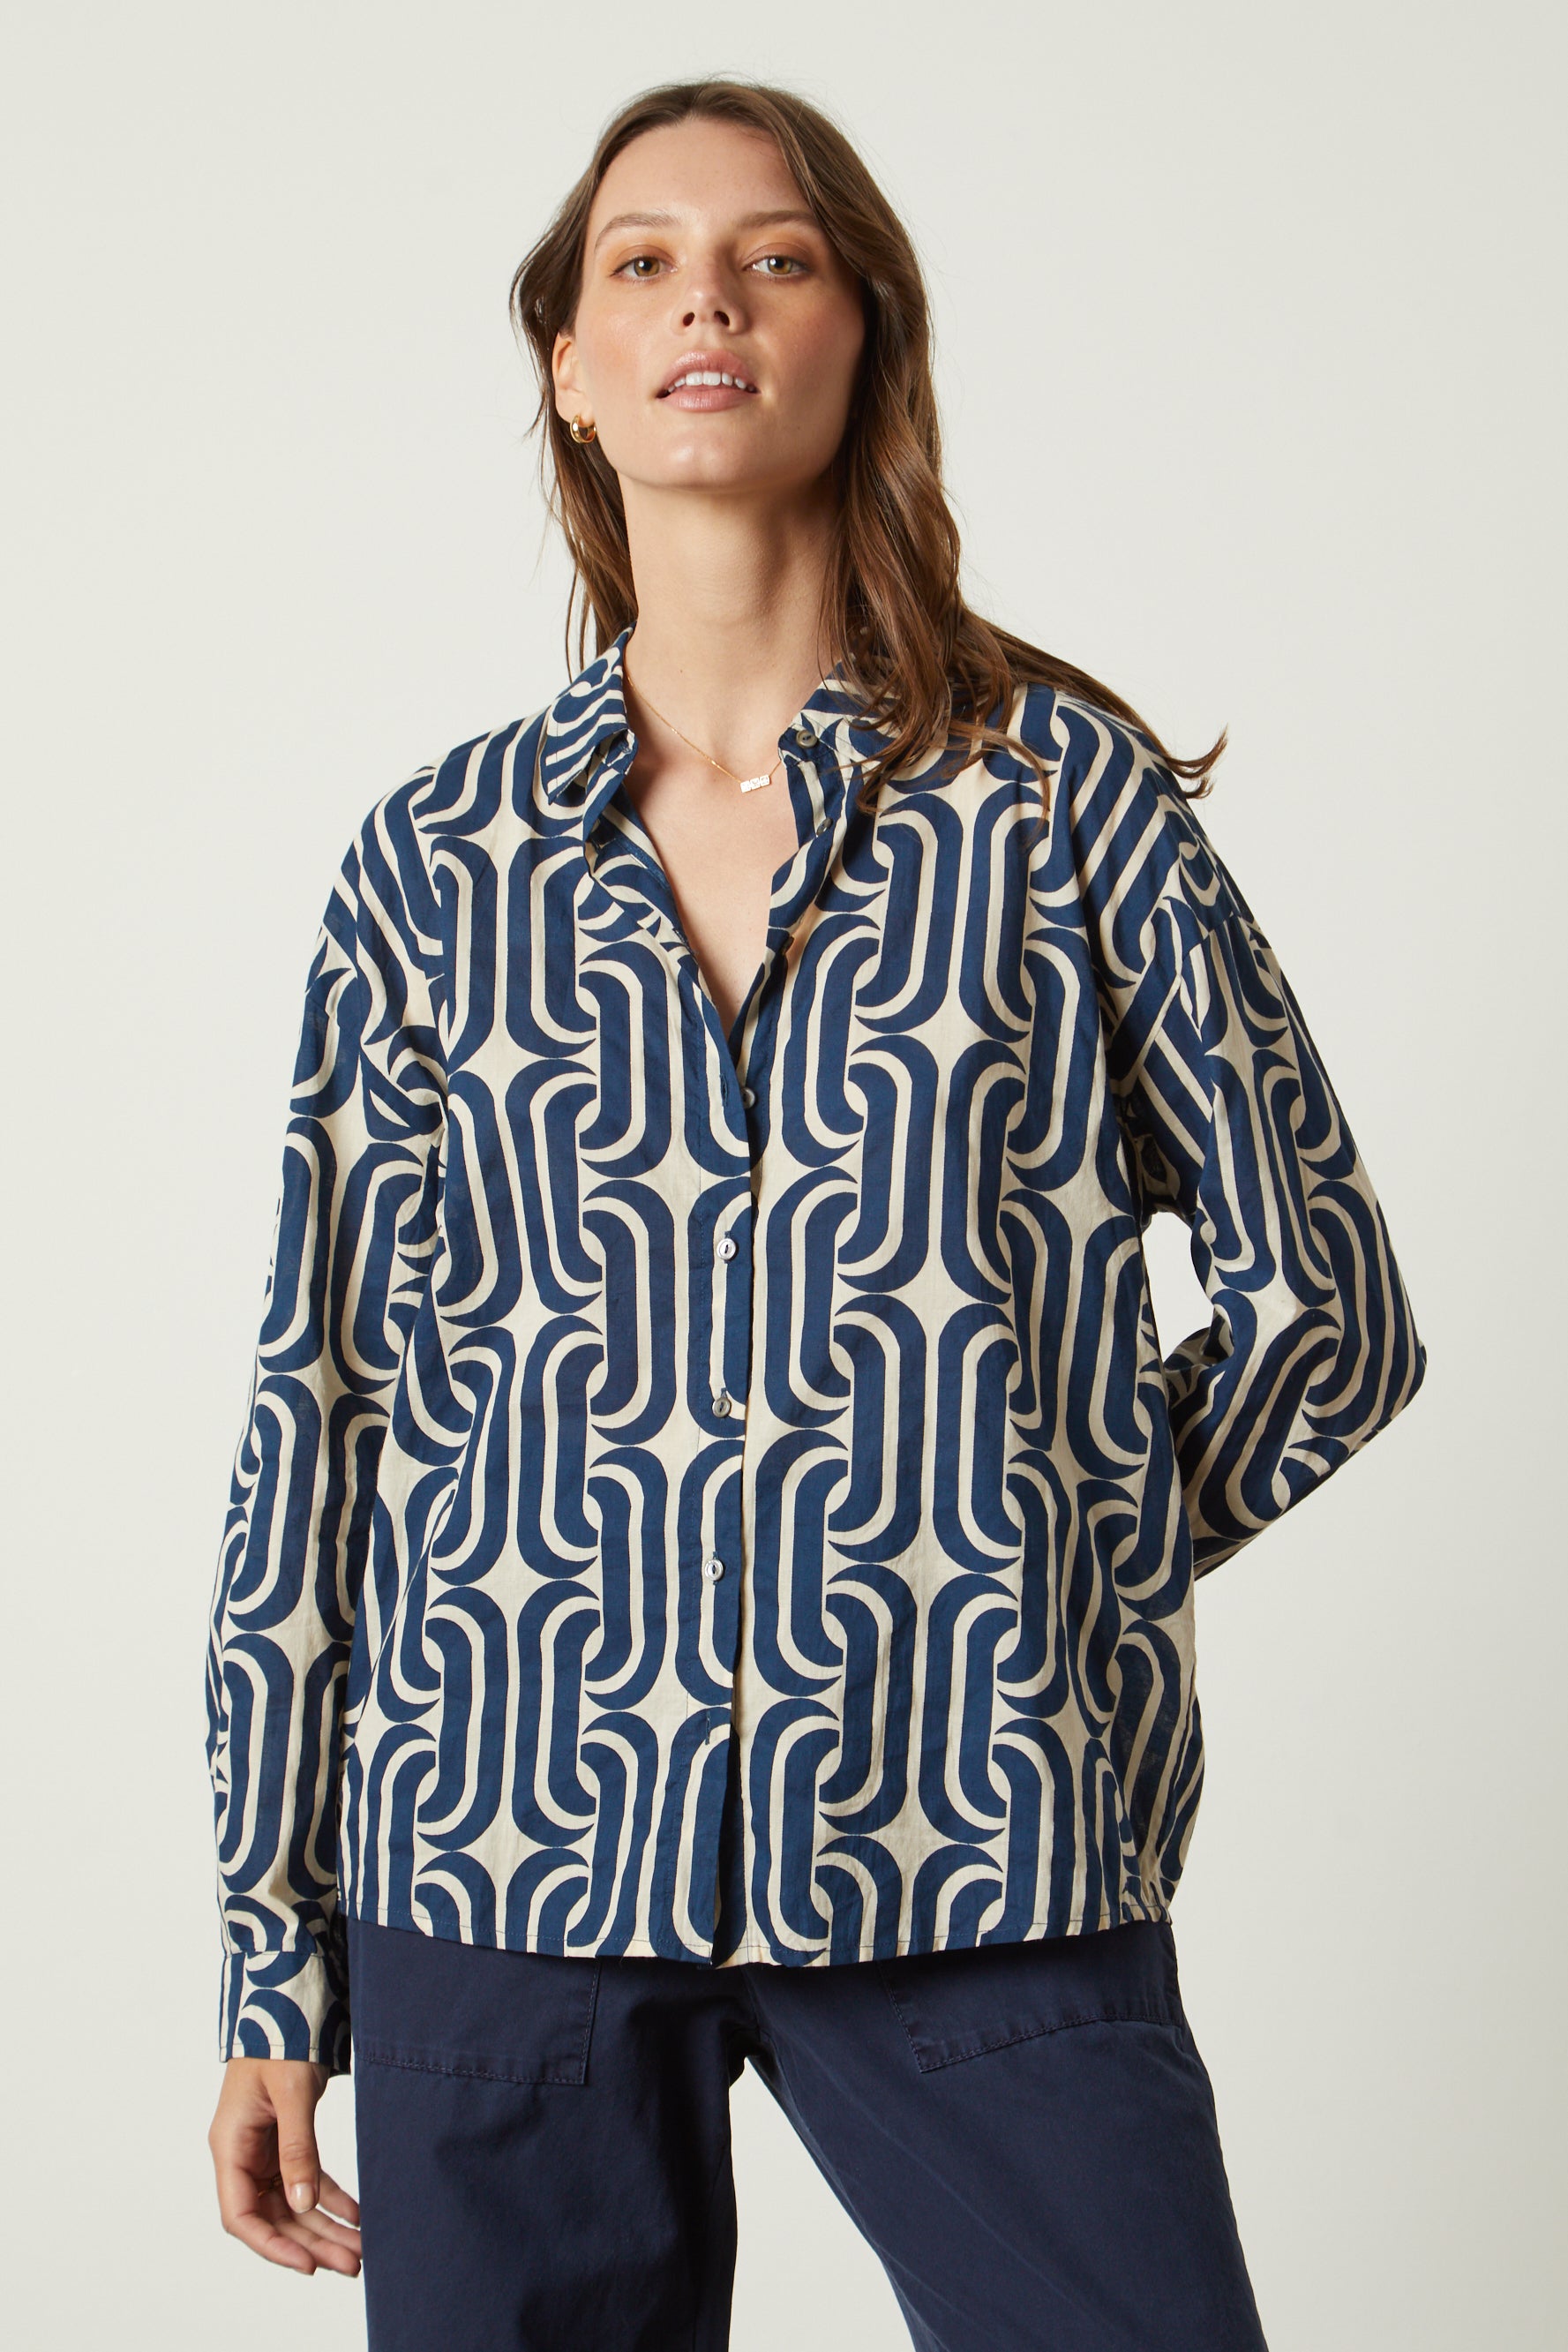 Velvet by Graham & Spencer | Isaiah Printed Button-Up Shirt | S | NAVY-WVNSHIRT